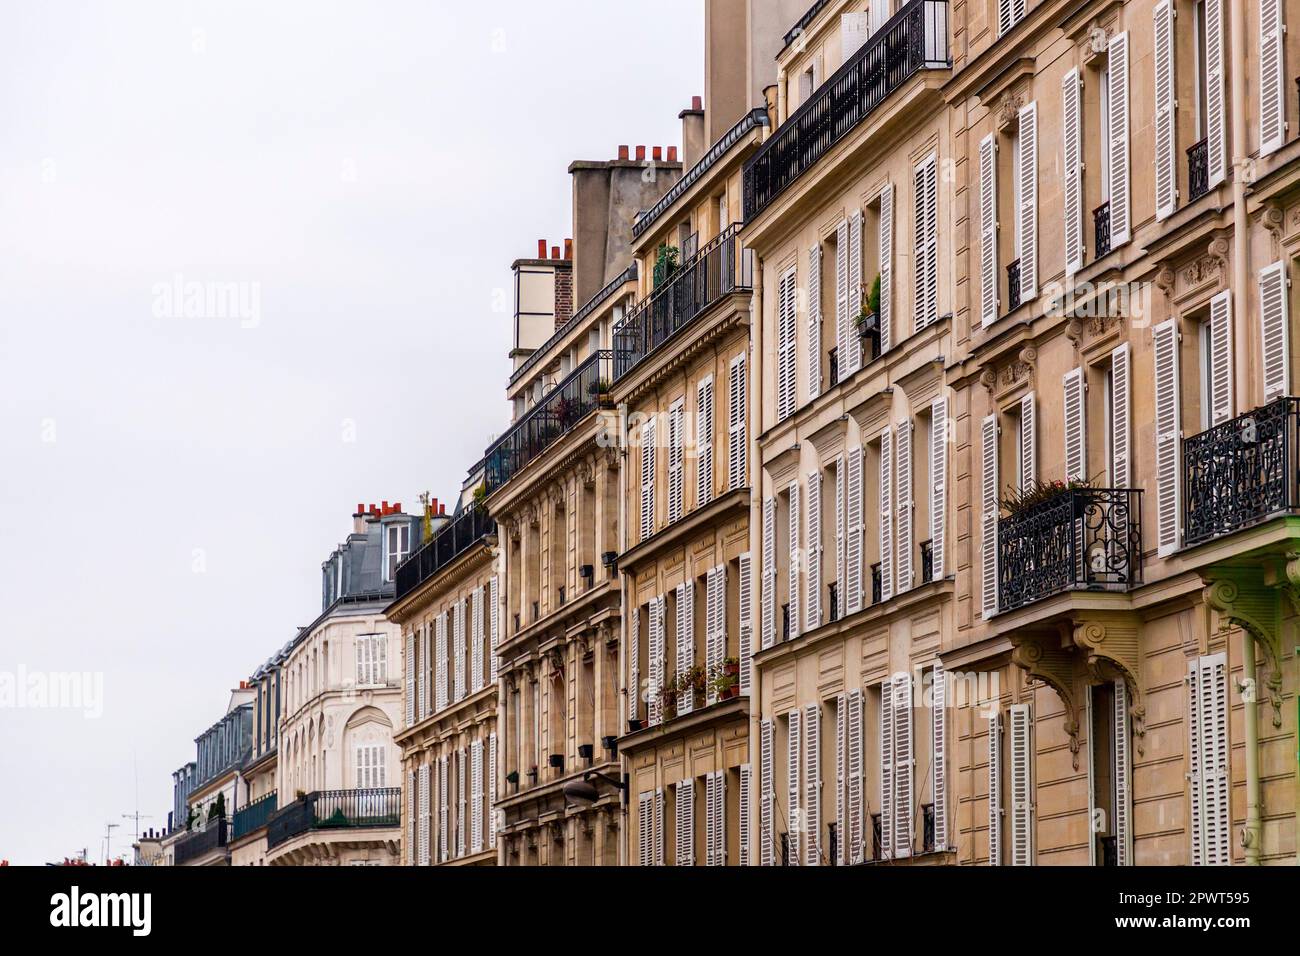 Detail from typical French architecture in Paris, France Stock Photo